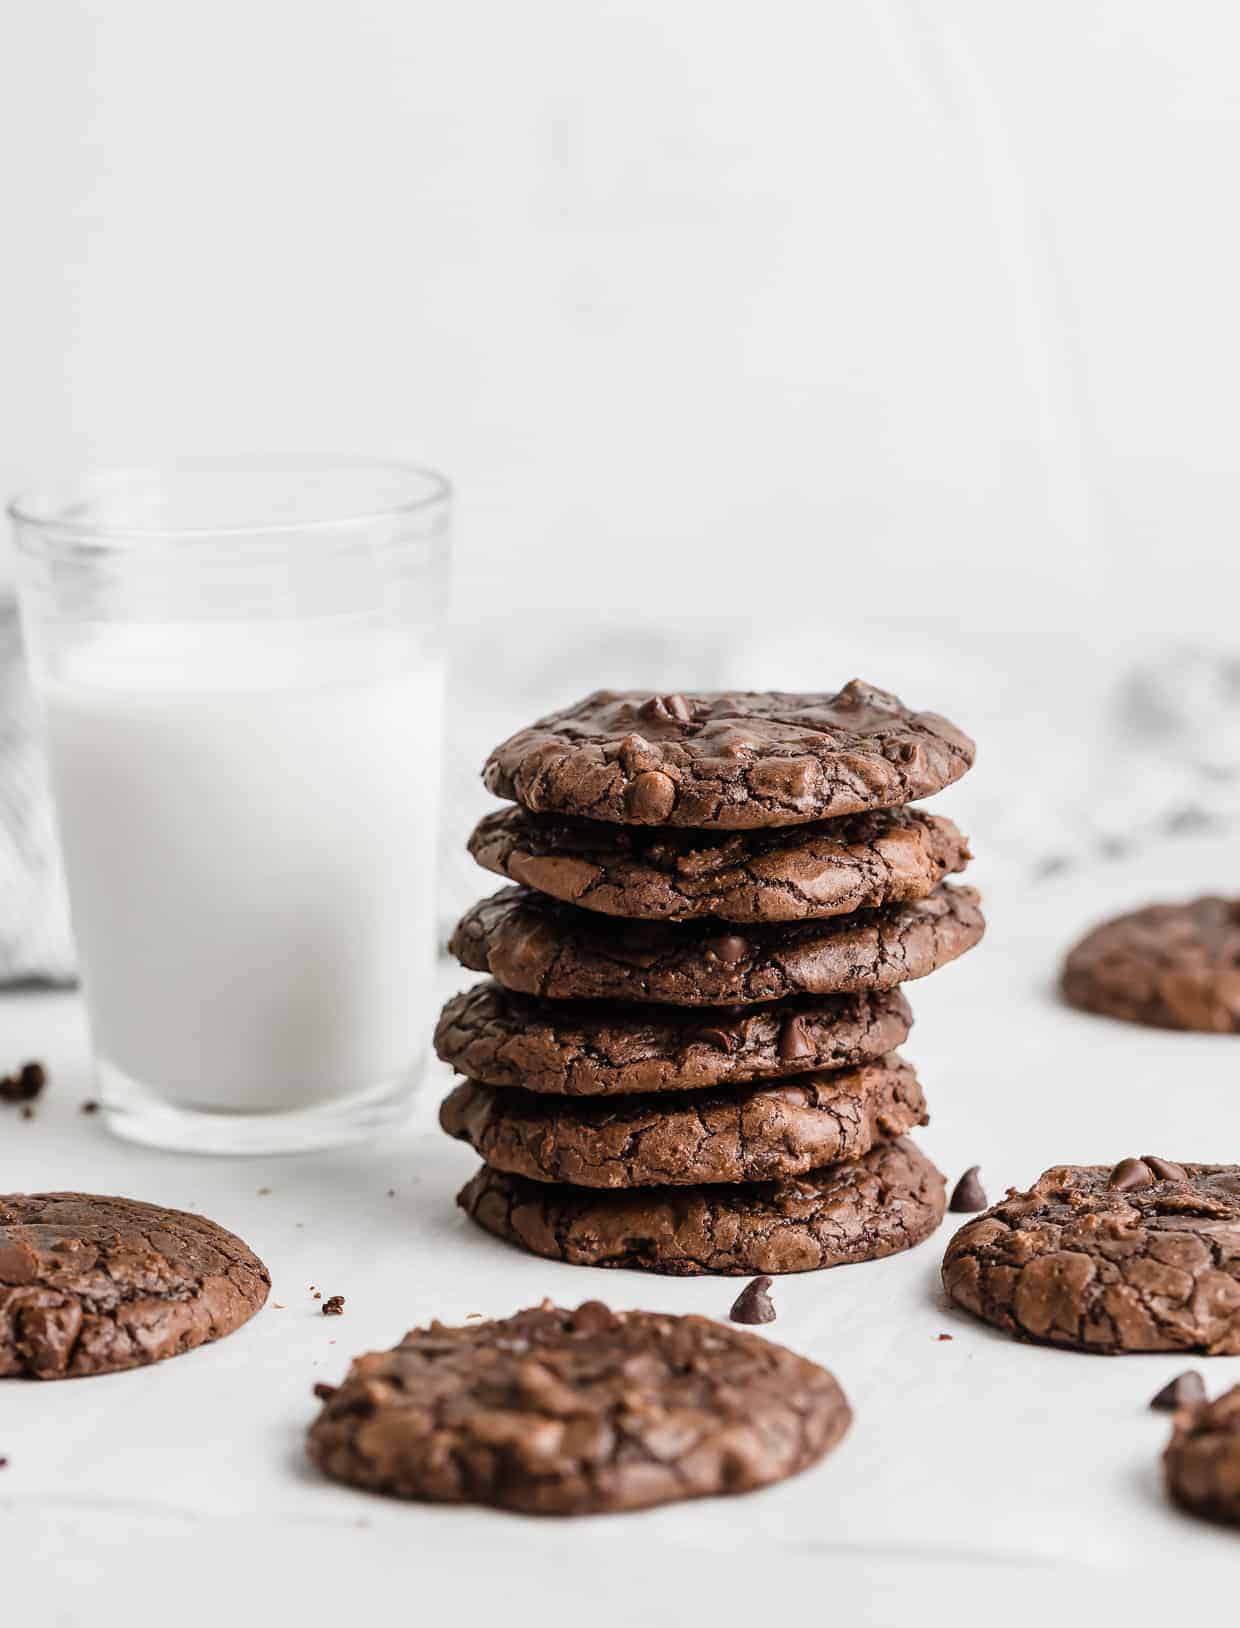 A stack of dark brown brownie cookies with a glass of milk next to it against a white background.